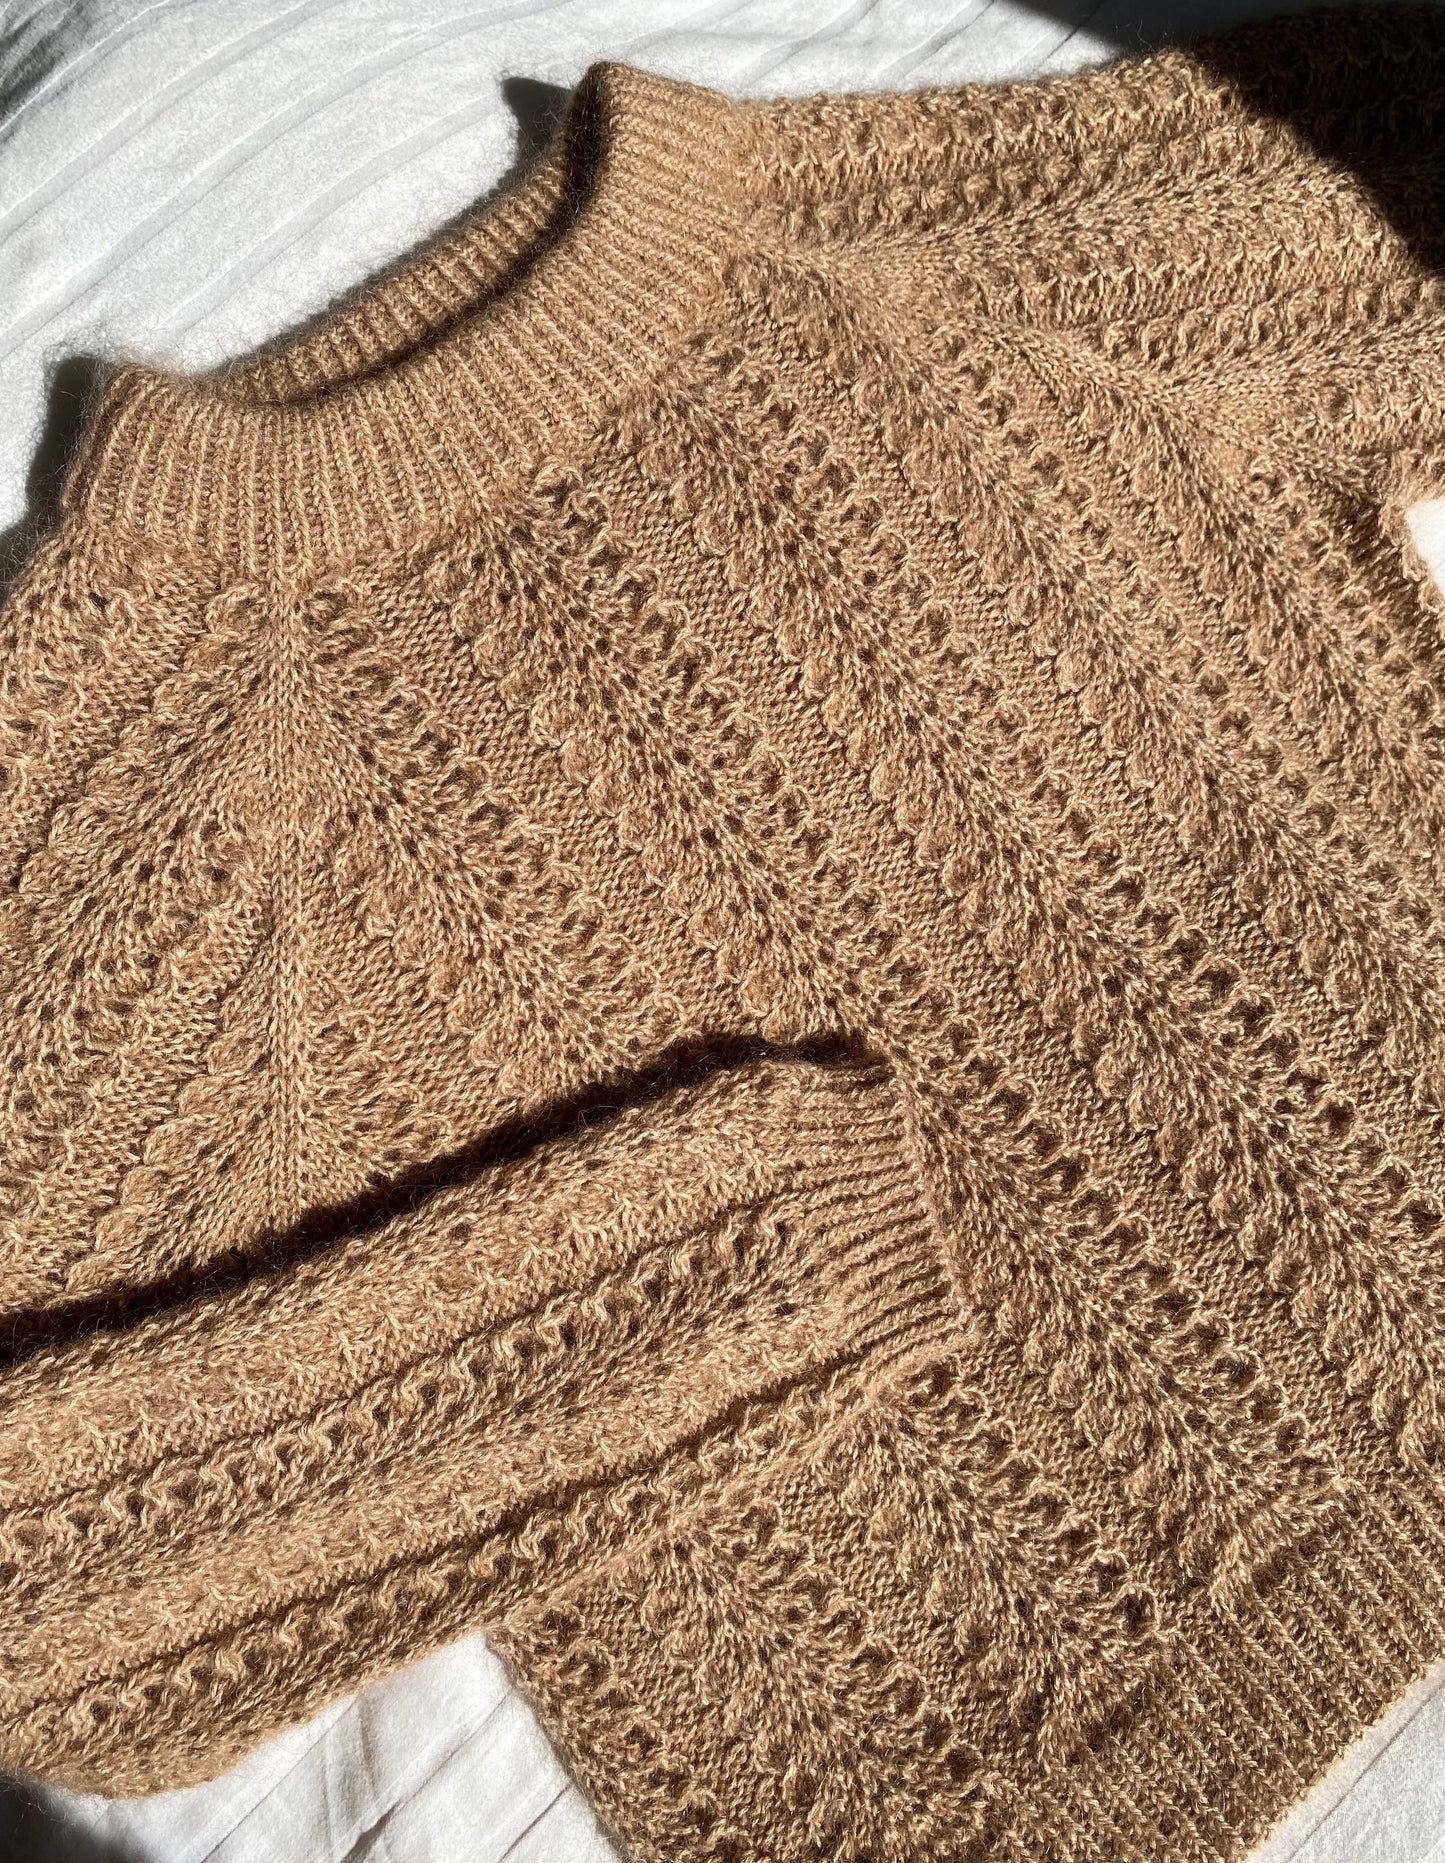 Acanthus Sweater - Norsk